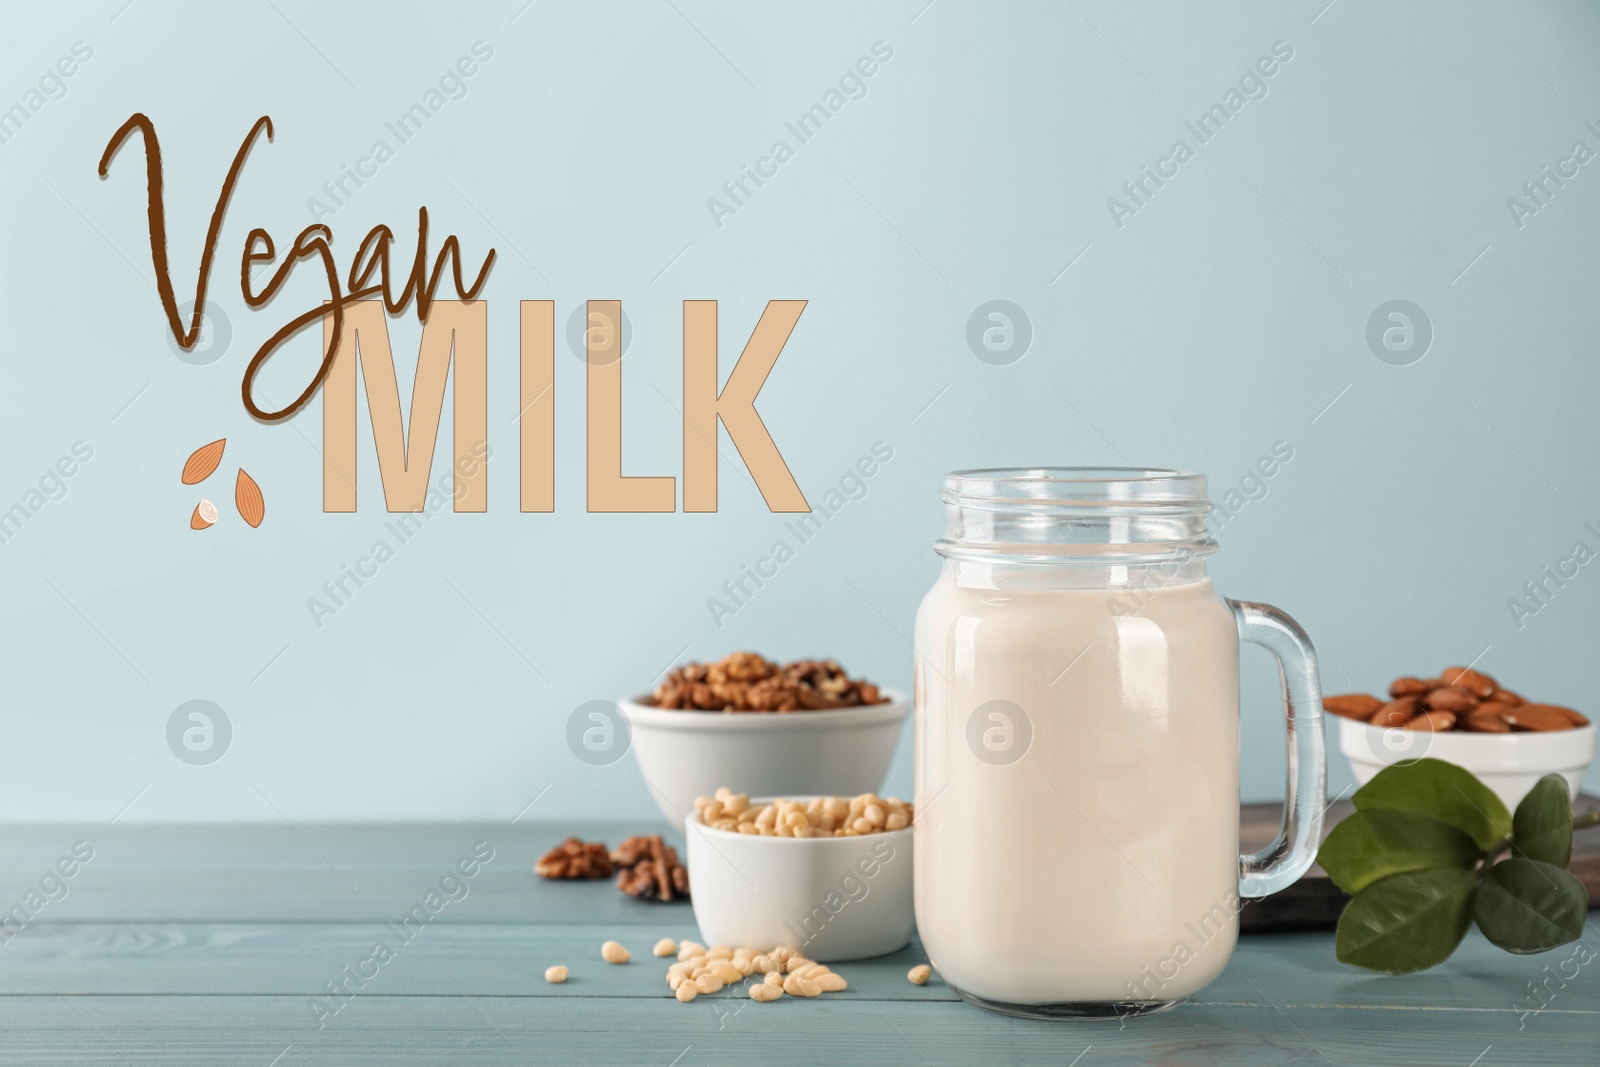 Image of Vegan milk and different nuts on light blue wooden table